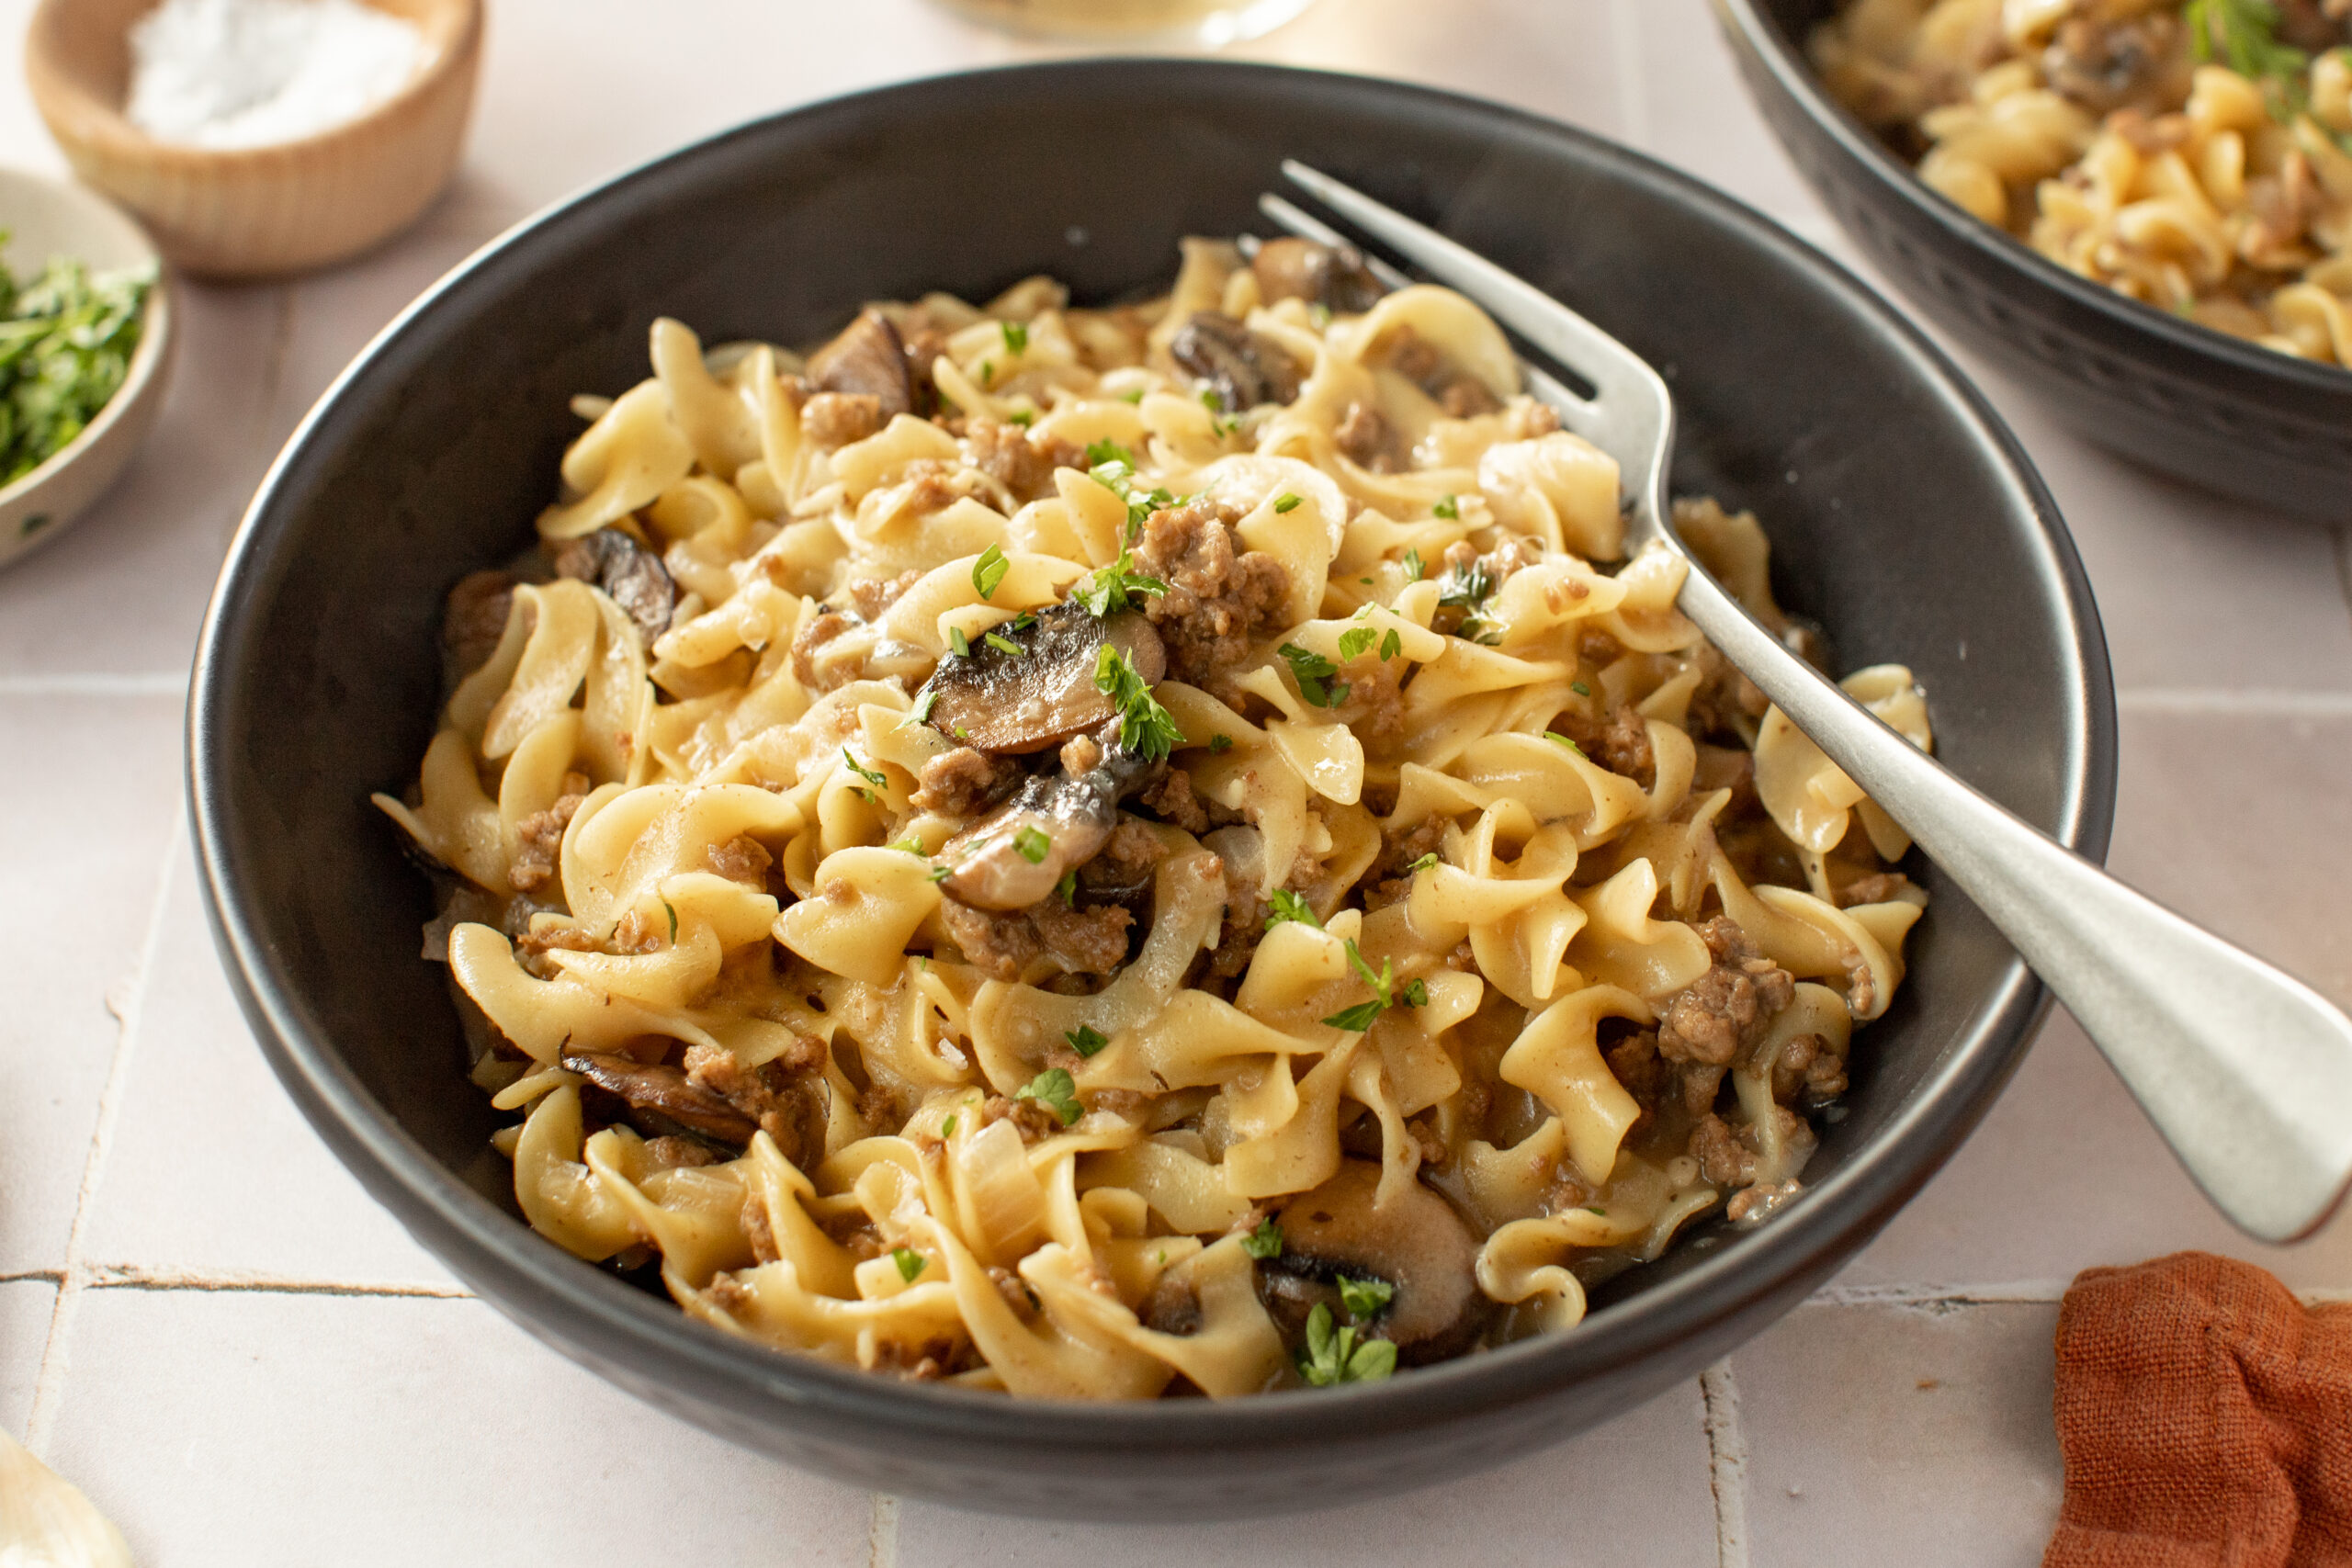 high protein recipes with cottage cheese beef stroganoff